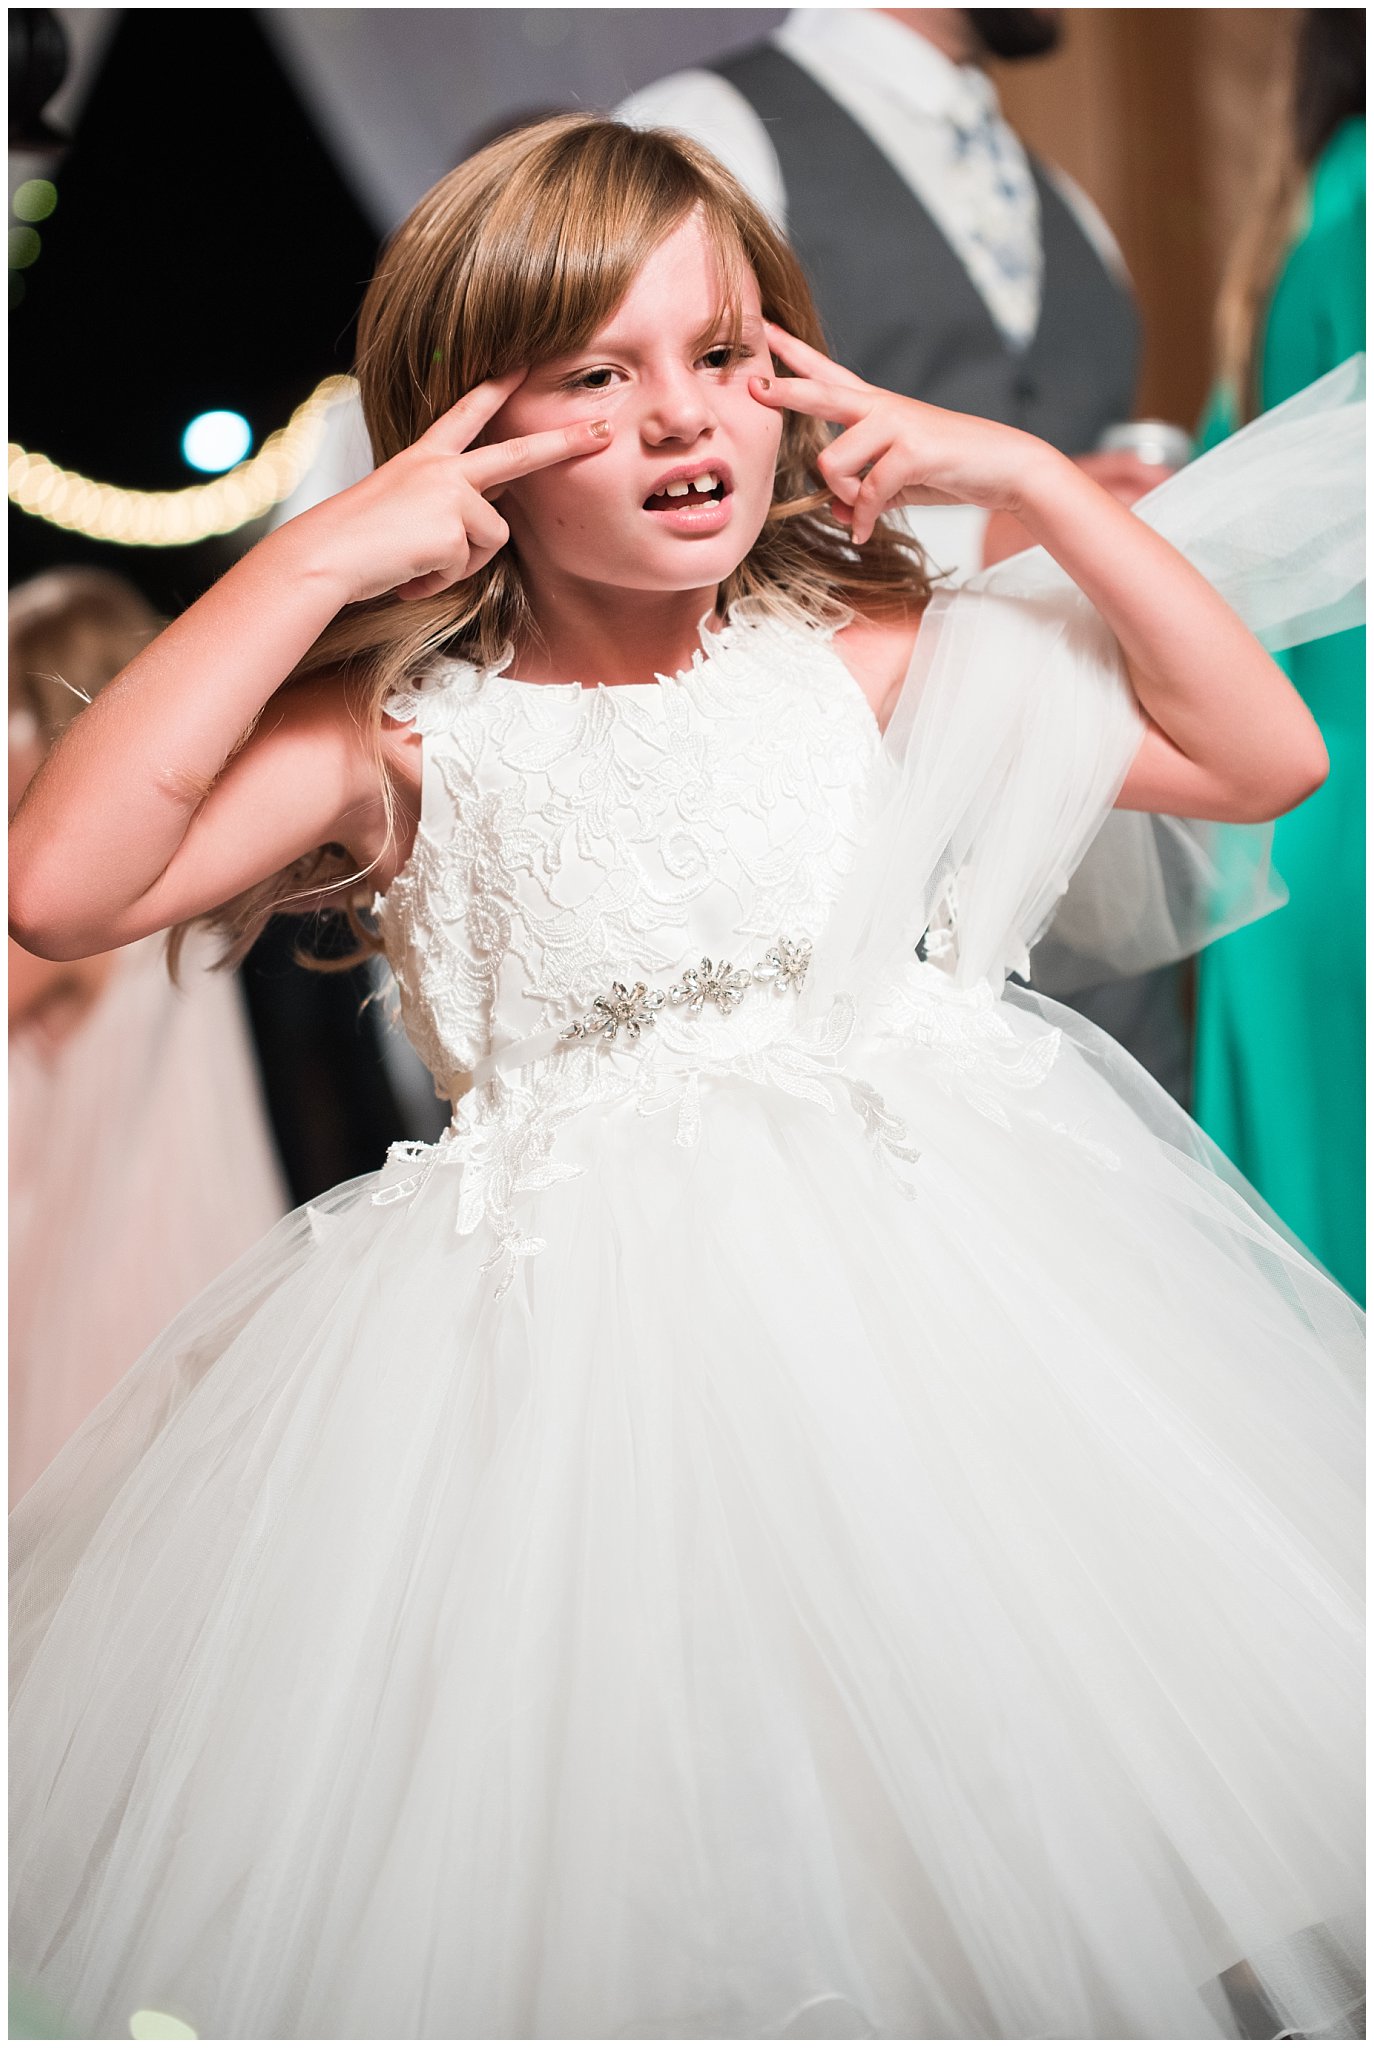 Wedding party dancing and celebrating | Dusty Blue and Rose Summer Wedding at Oak Hills Utah | Jessie and Dallin Photography